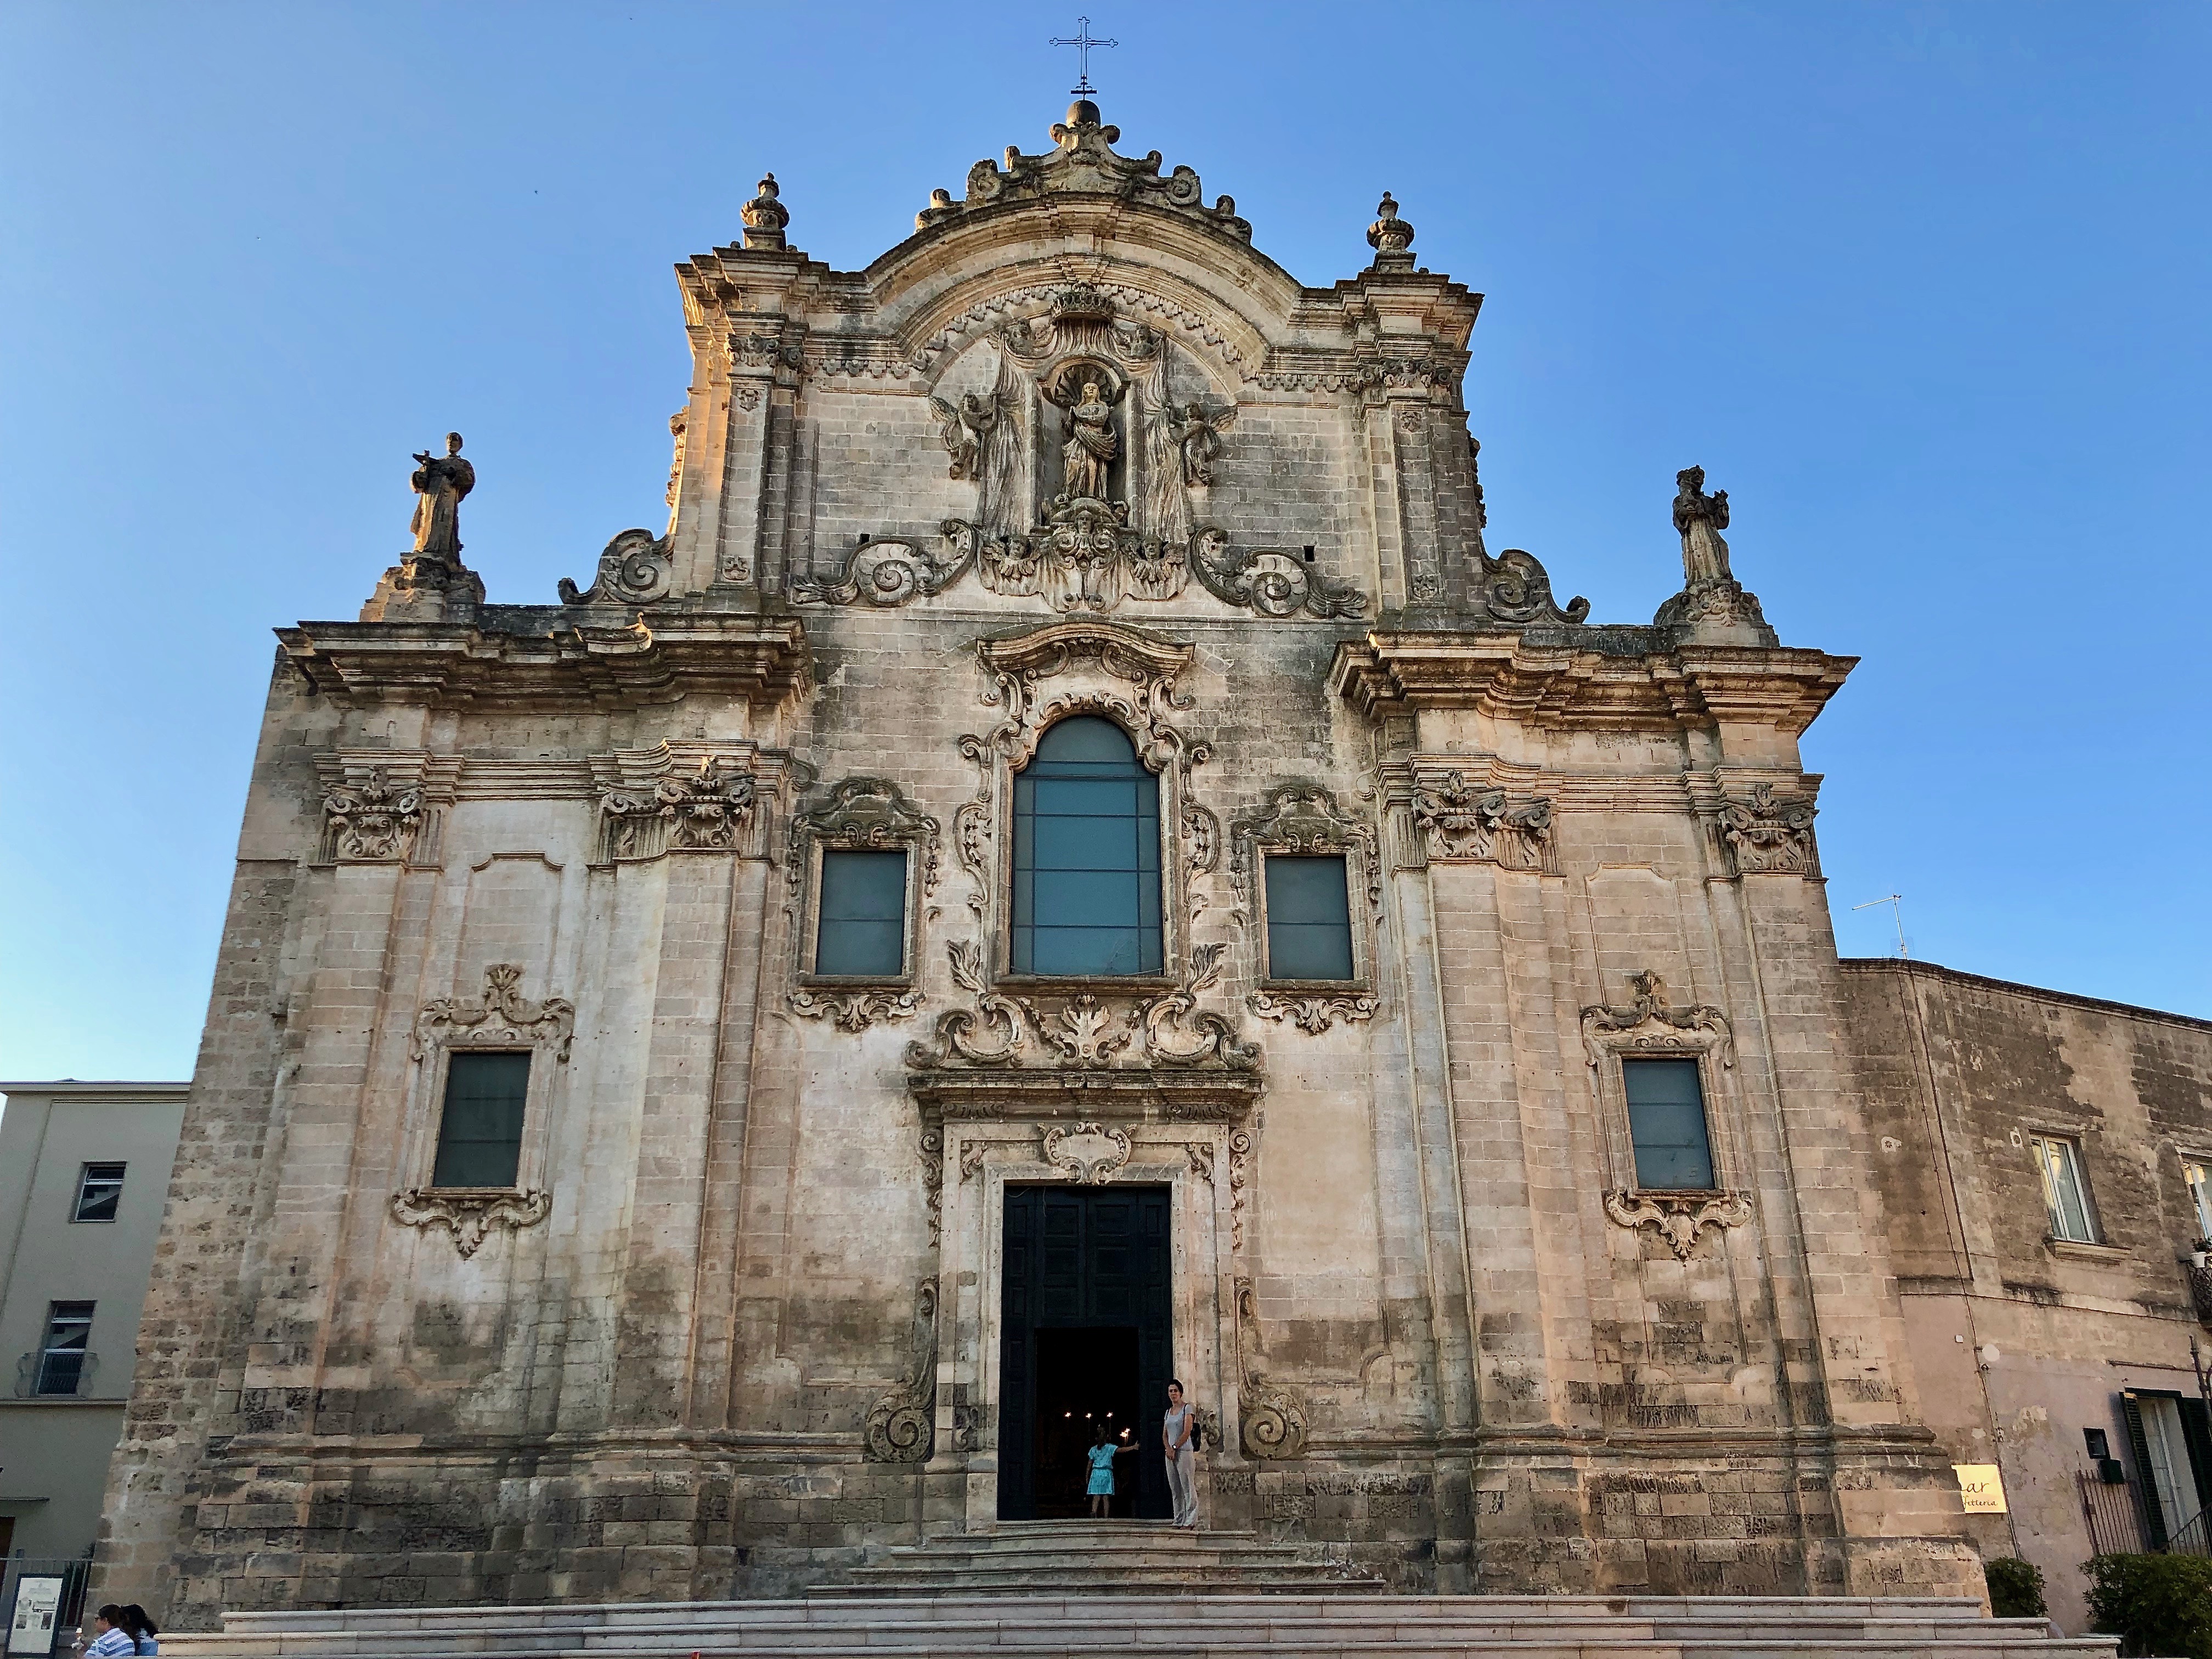 The baroque Church of Saint Francis of Assisi in Matera